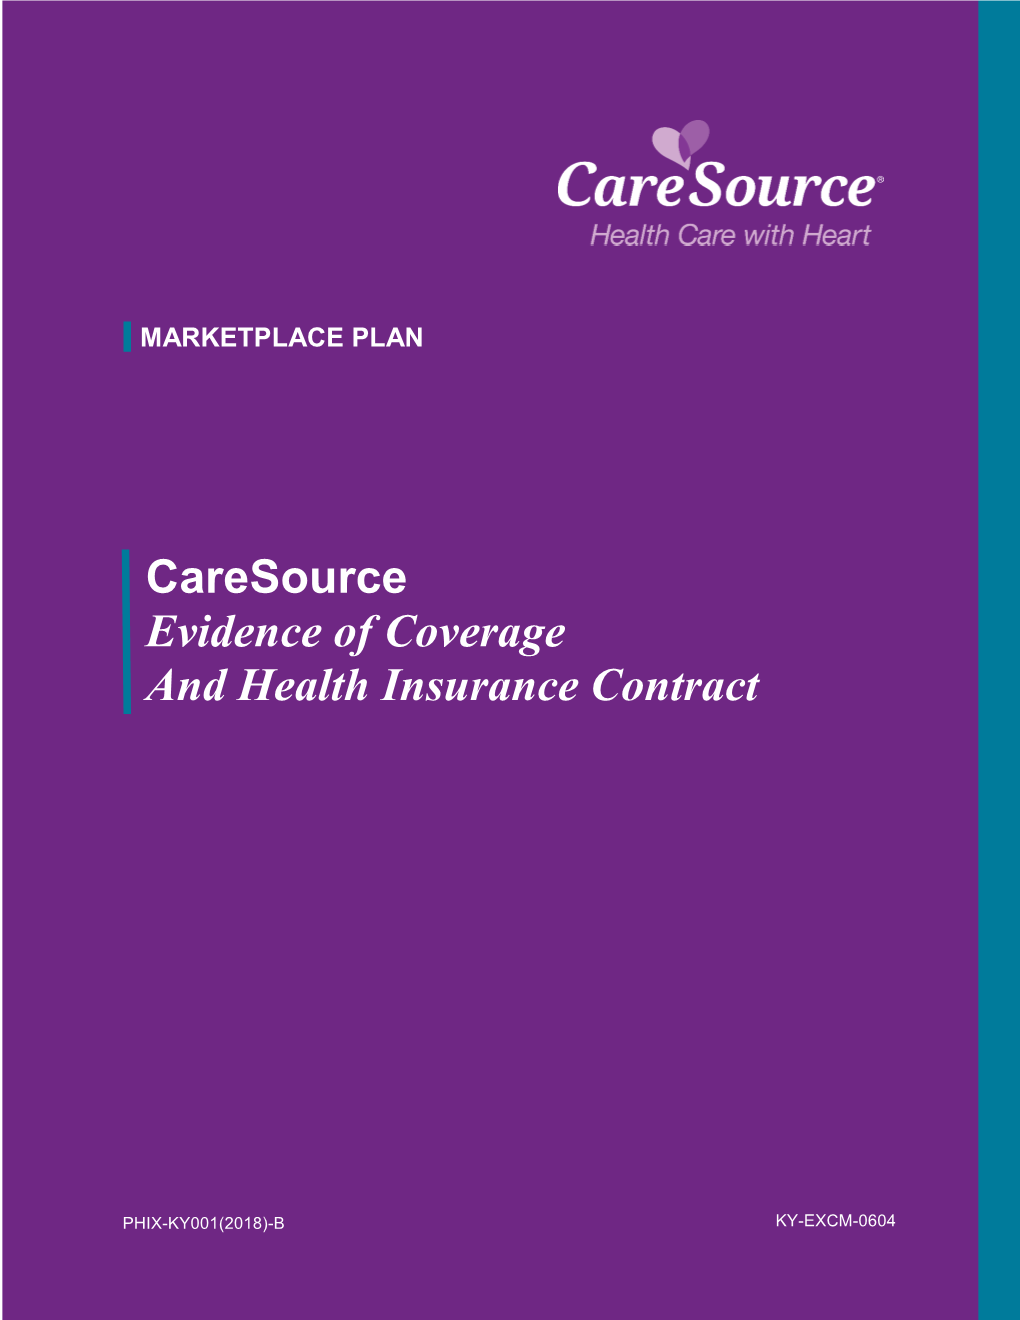 Caresource Evidence of Coverage and Health Insurance Contract